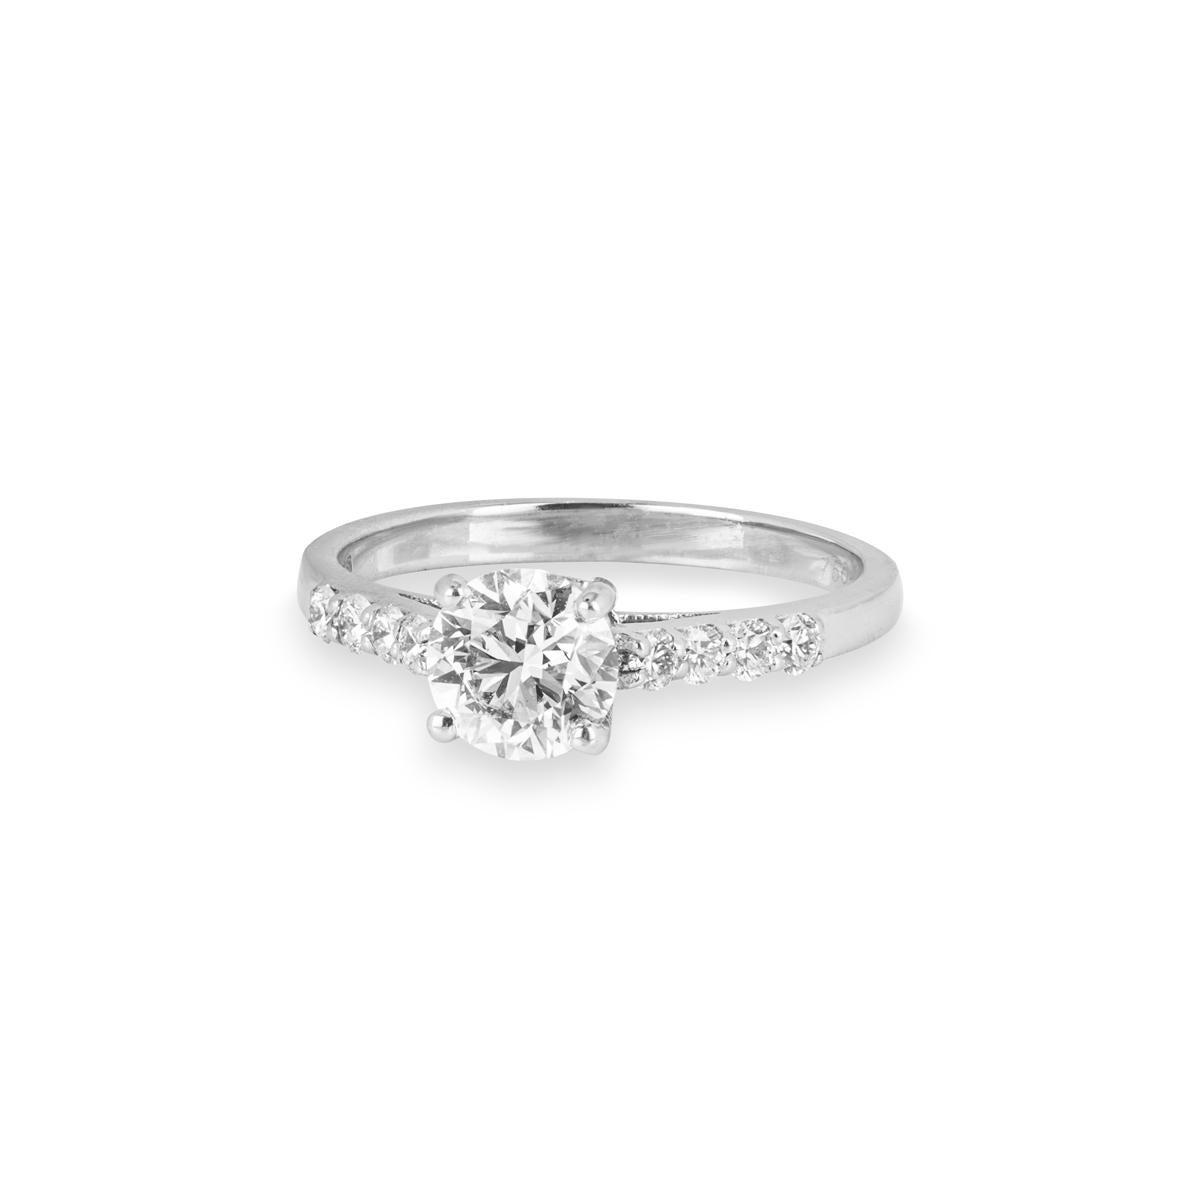 IGR Certified White Gold Round Brilliant Cut Diamond Ring 0.94ct H-I/VS In New Condition For Sale In London, GB